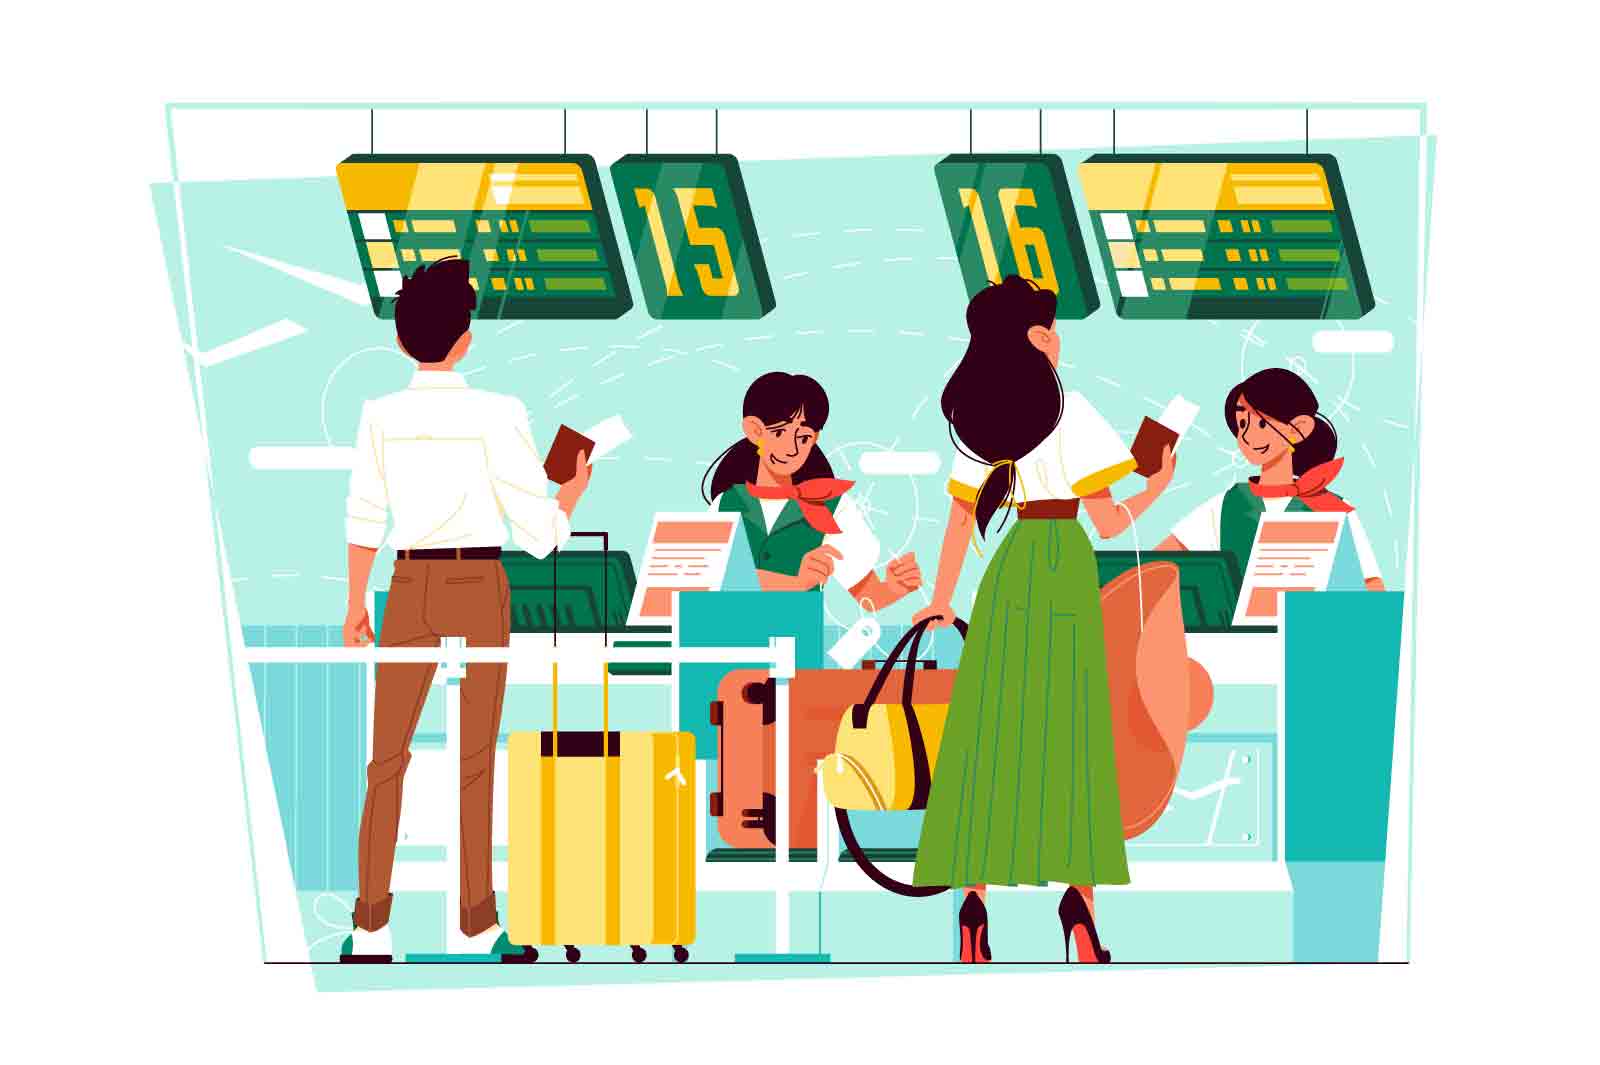 People stand in line for checkin in airport vector illustration. Show passport on registration flat style. Travel, voyage, adventure concept